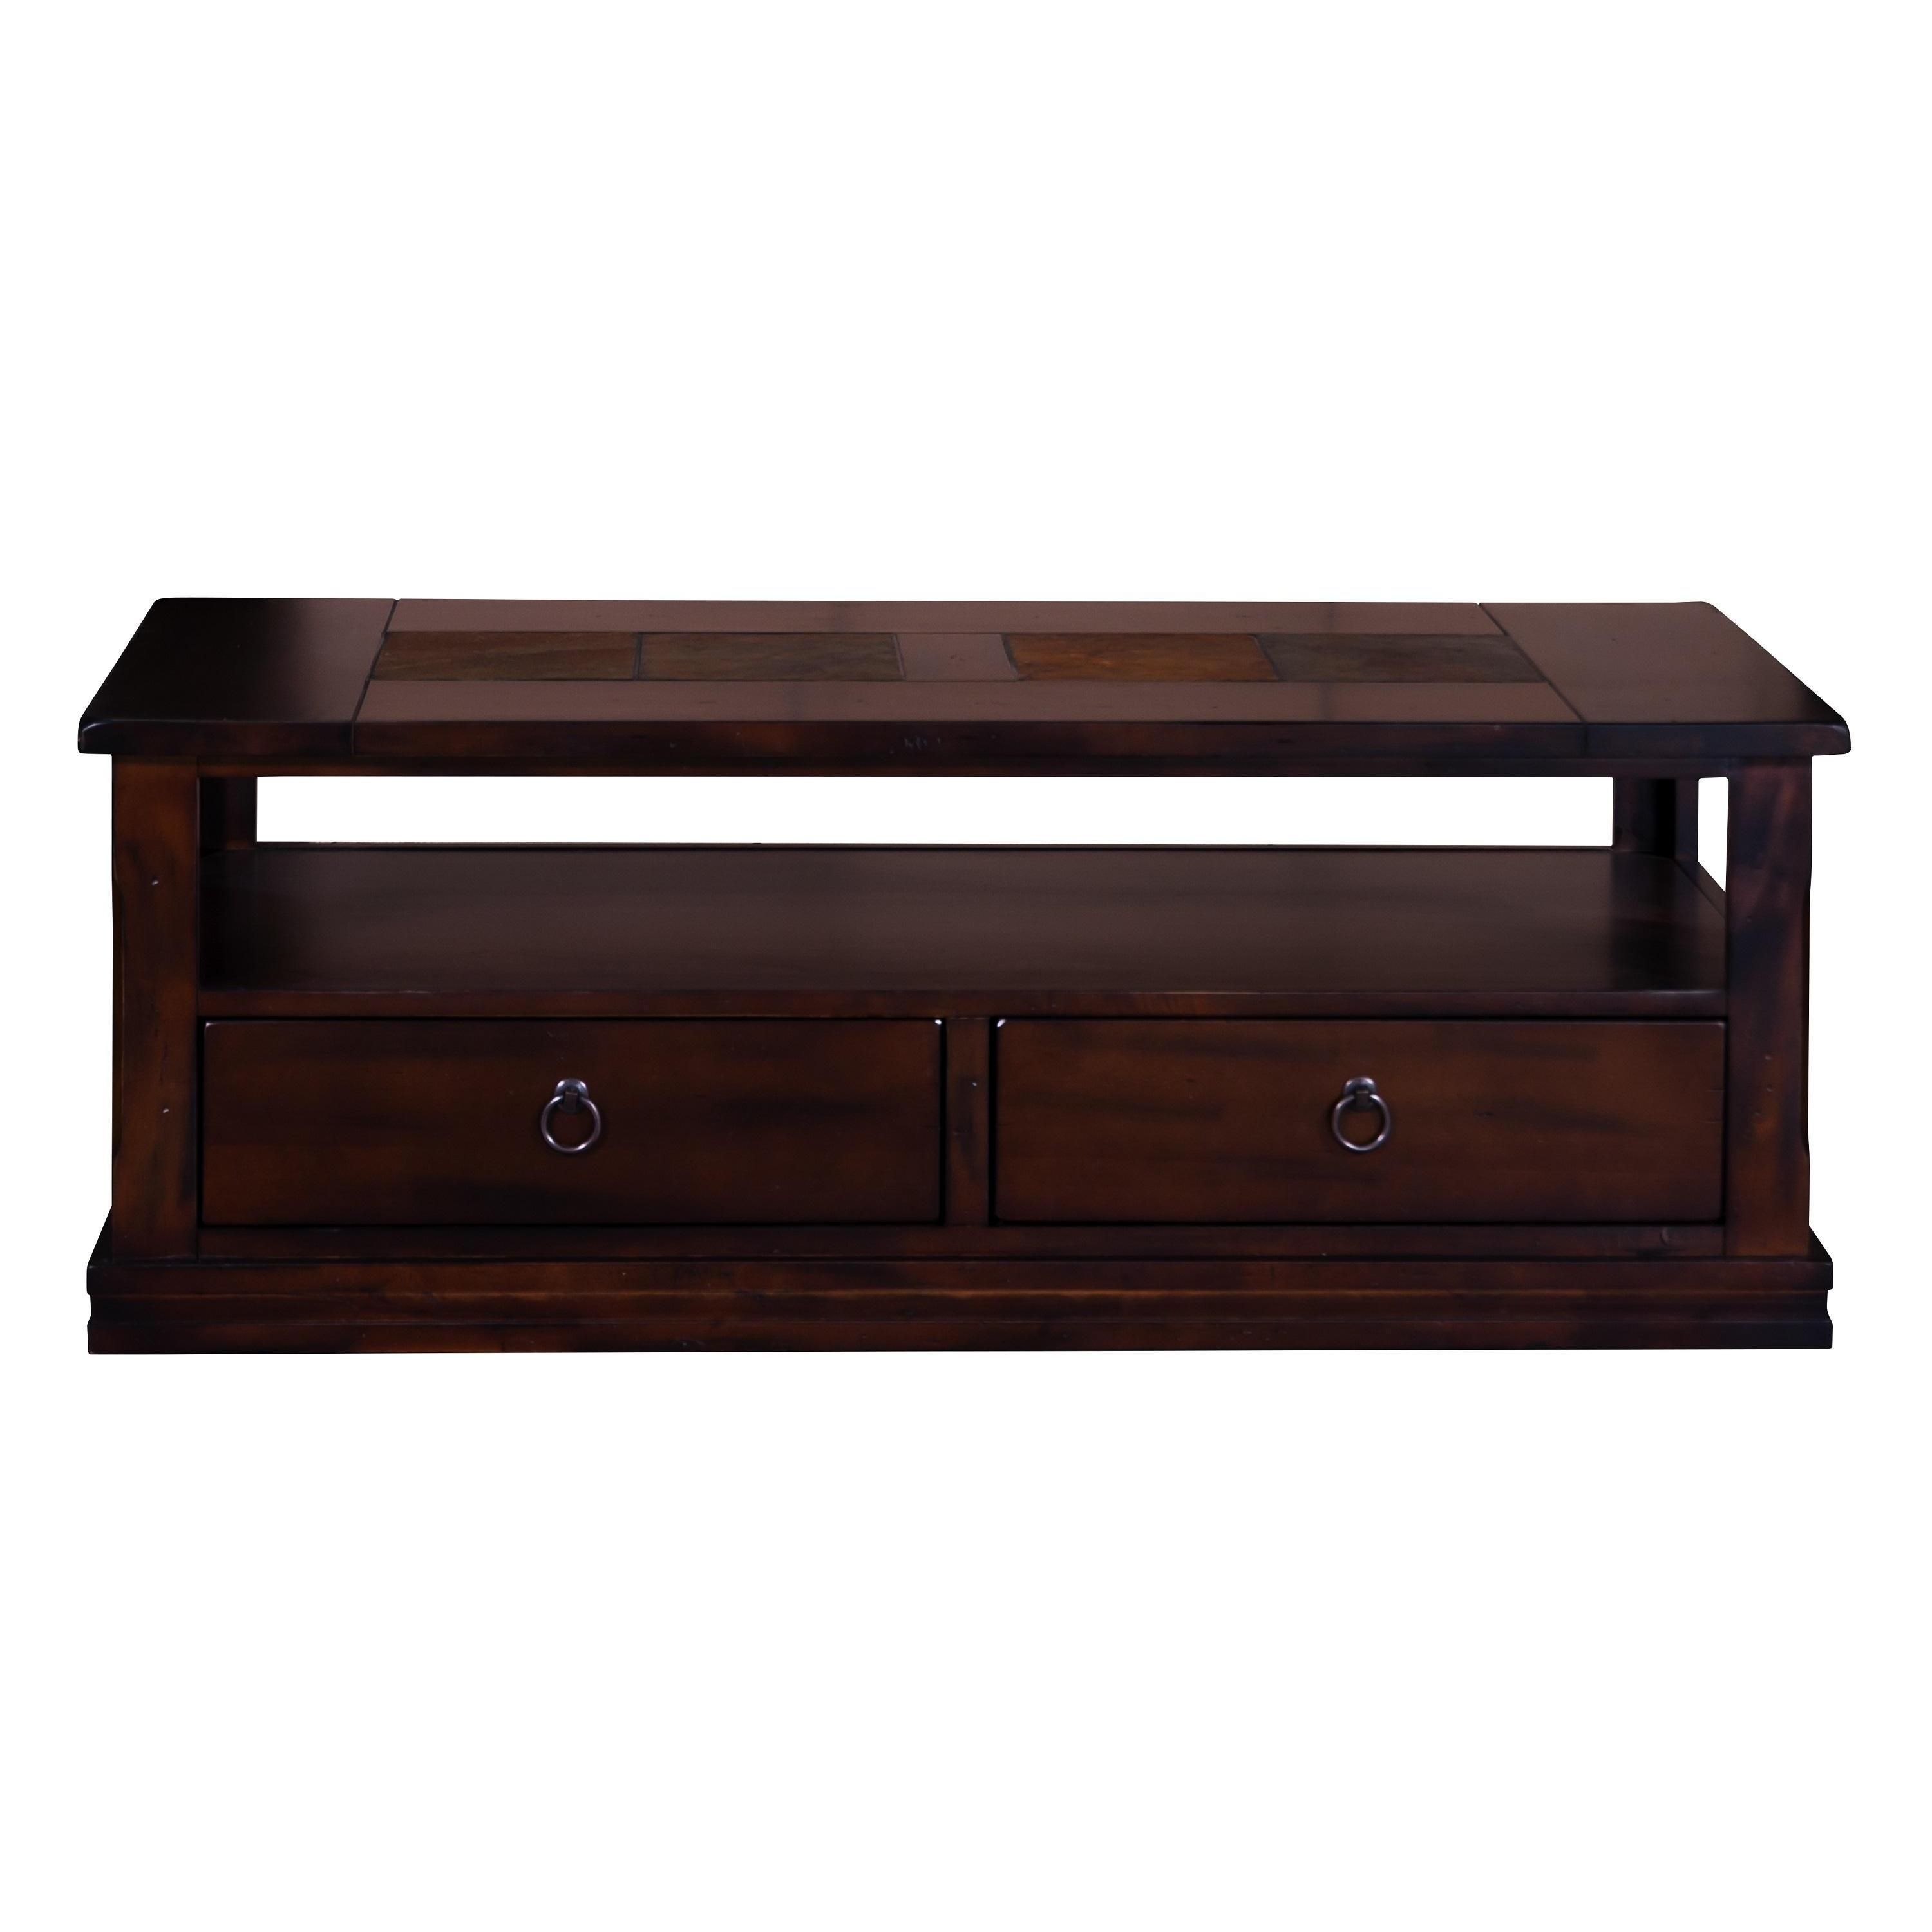 Sunny Designs Santa Fe Coffee Table With Storage Drawers And Casters Regarding Santa Fe Coffee Tables (View 21 of 30)